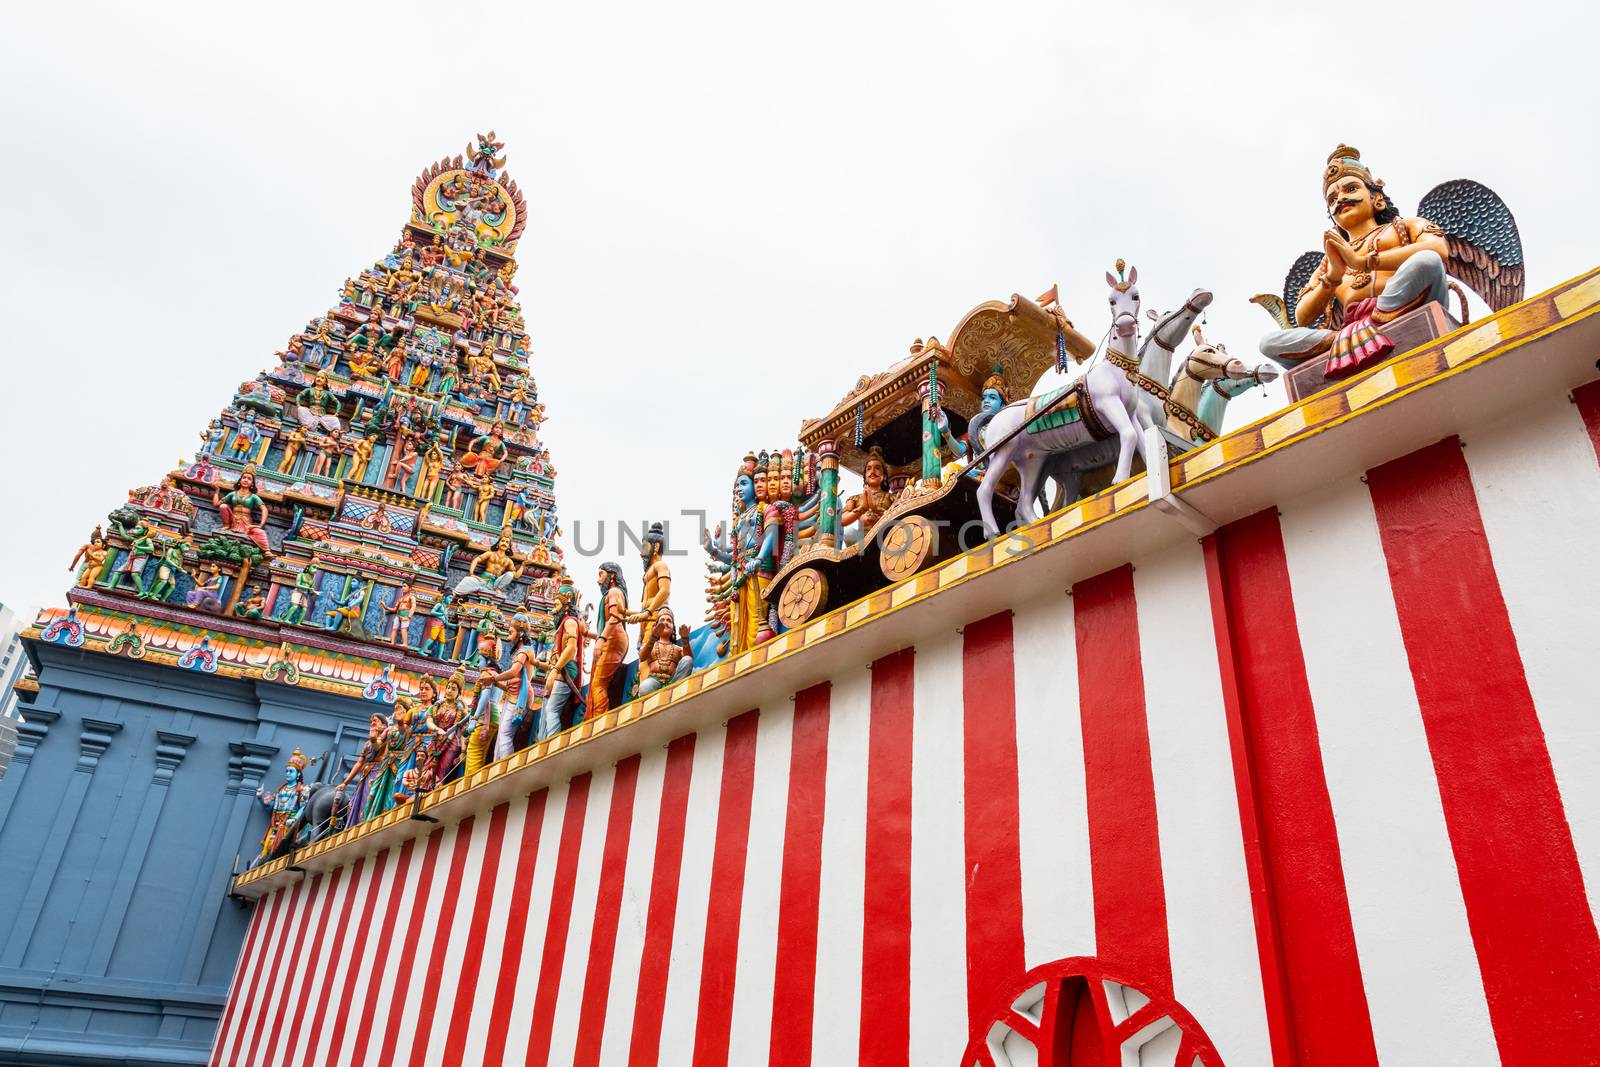 Low angle view from outside the Sri Veeramakaliamman Temple in Singapore